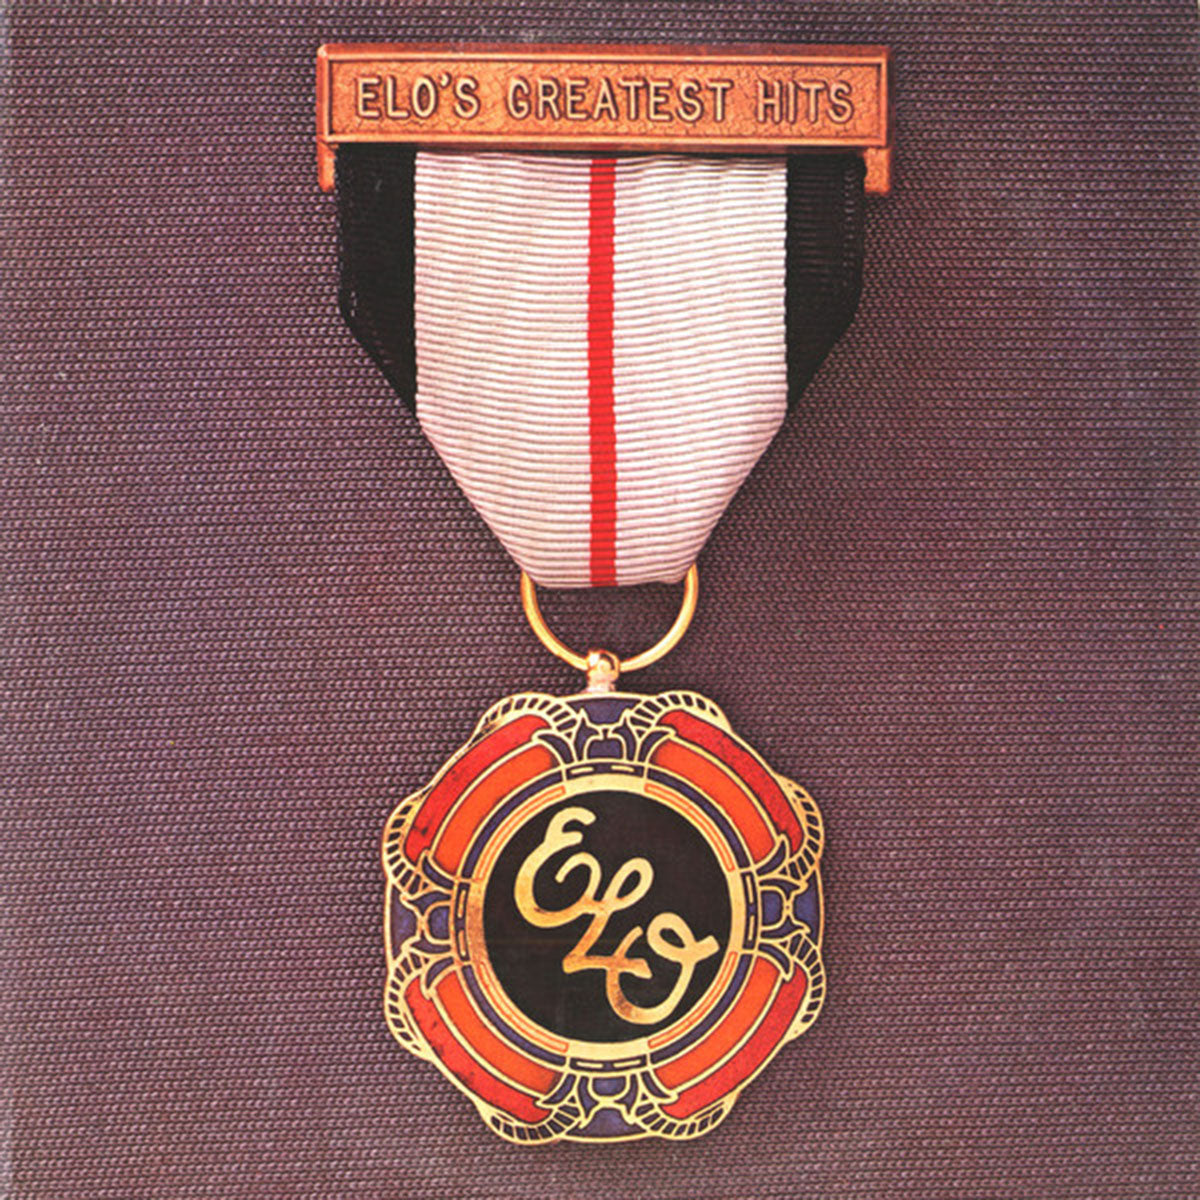 Electric Light Orchestra ‎– ELO's Greatest Hits - 1979 Pressing!